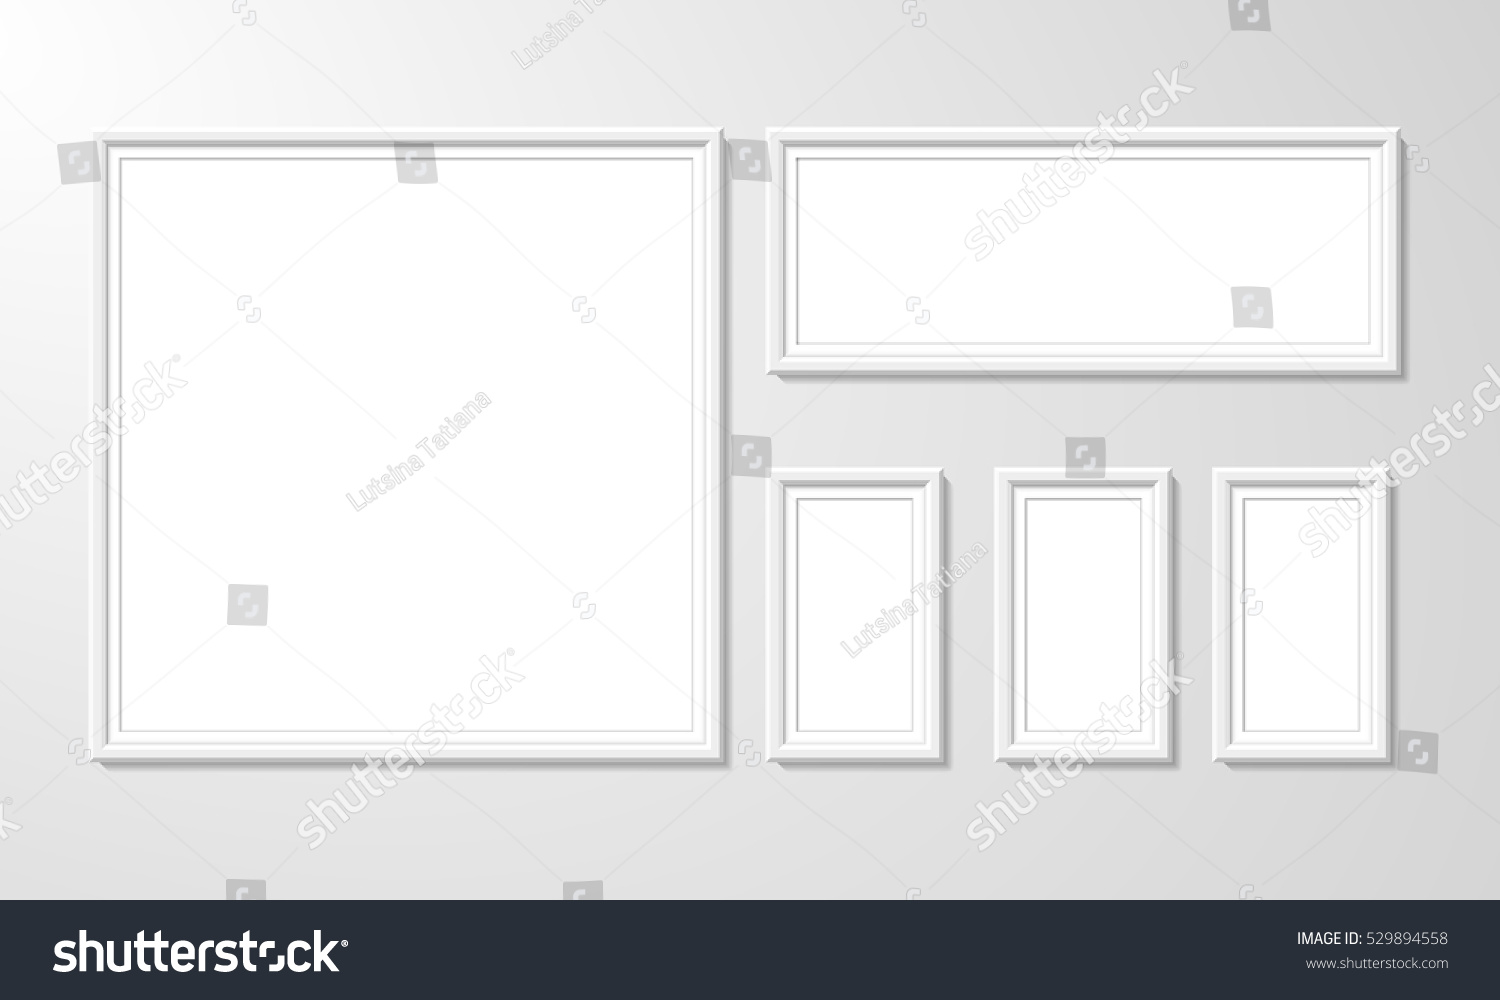 blank picture frame template set isolated on wall. Set of white photo frames. Vector realistic white picture frame composition. Modern design element for you product mock-up or presentation. #529894558